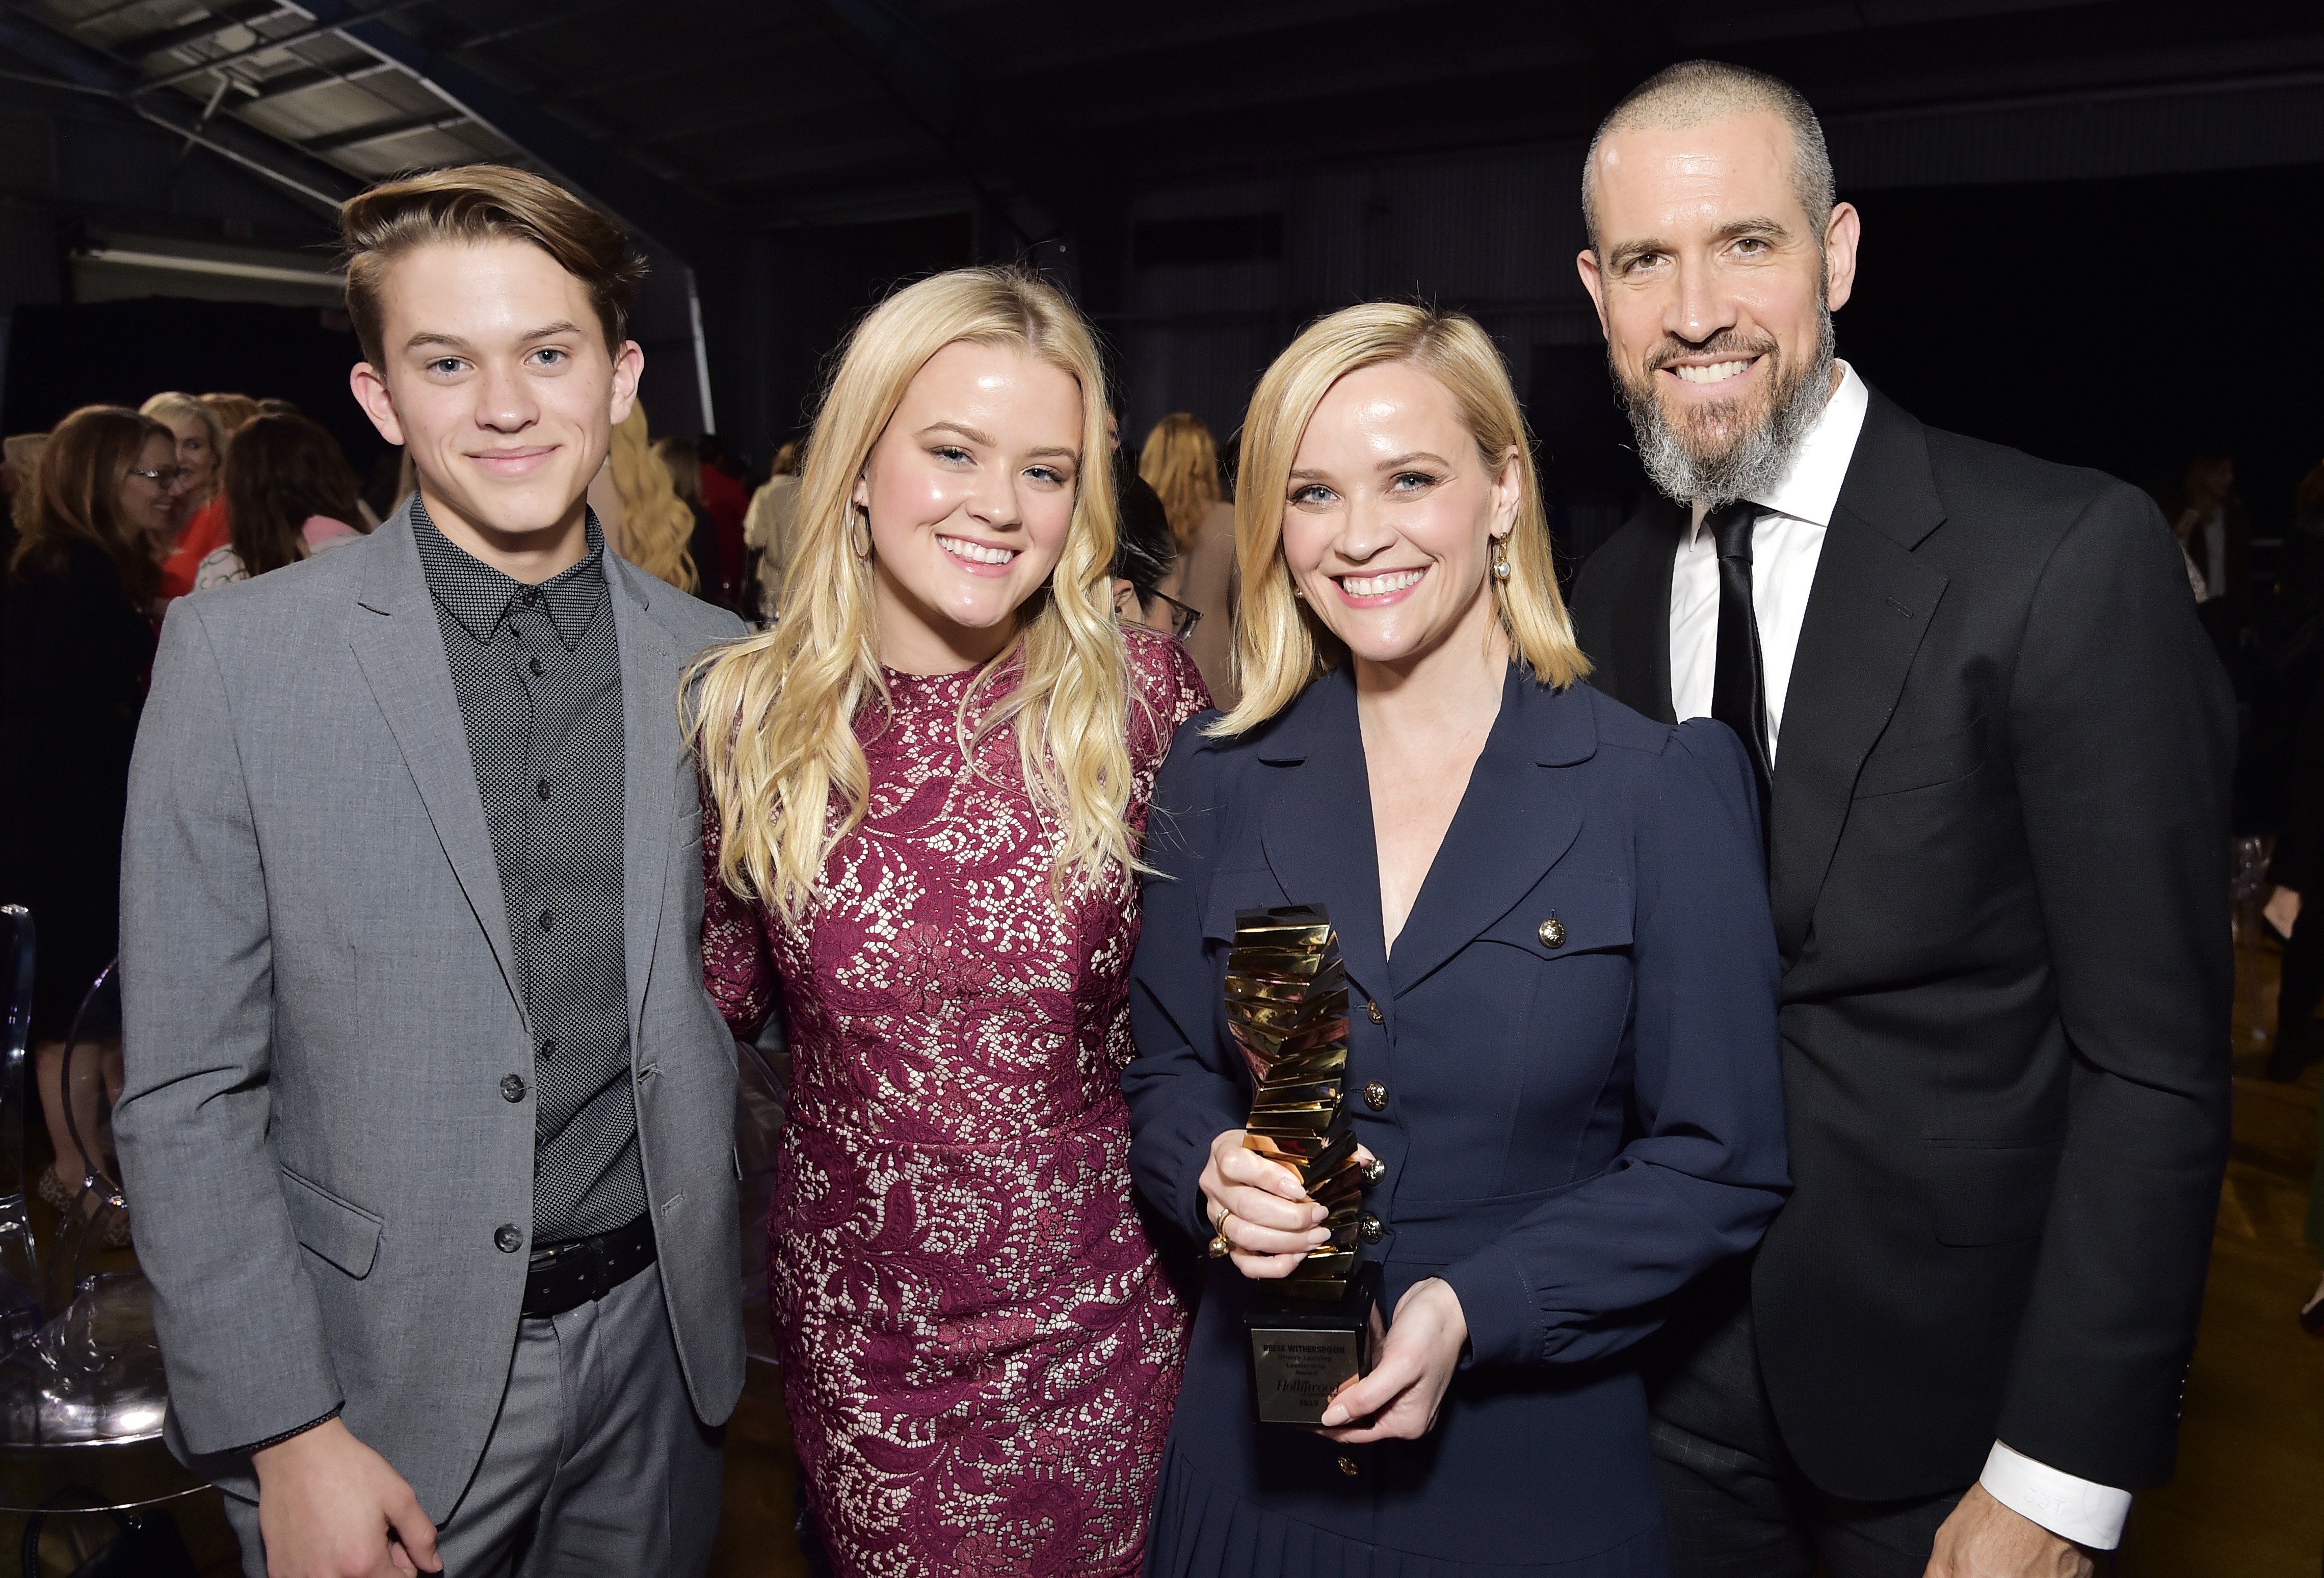 Deacon Reese Phillippe, Ava Elizabeth Phillippe, Reese Witherspoon und Jim Toth bei The Hollywood Reporter's Power 100 Women in Entertainment am 11. Dezember 2019 in Hollywood, Kalifornien. | Quelle: Getty Images